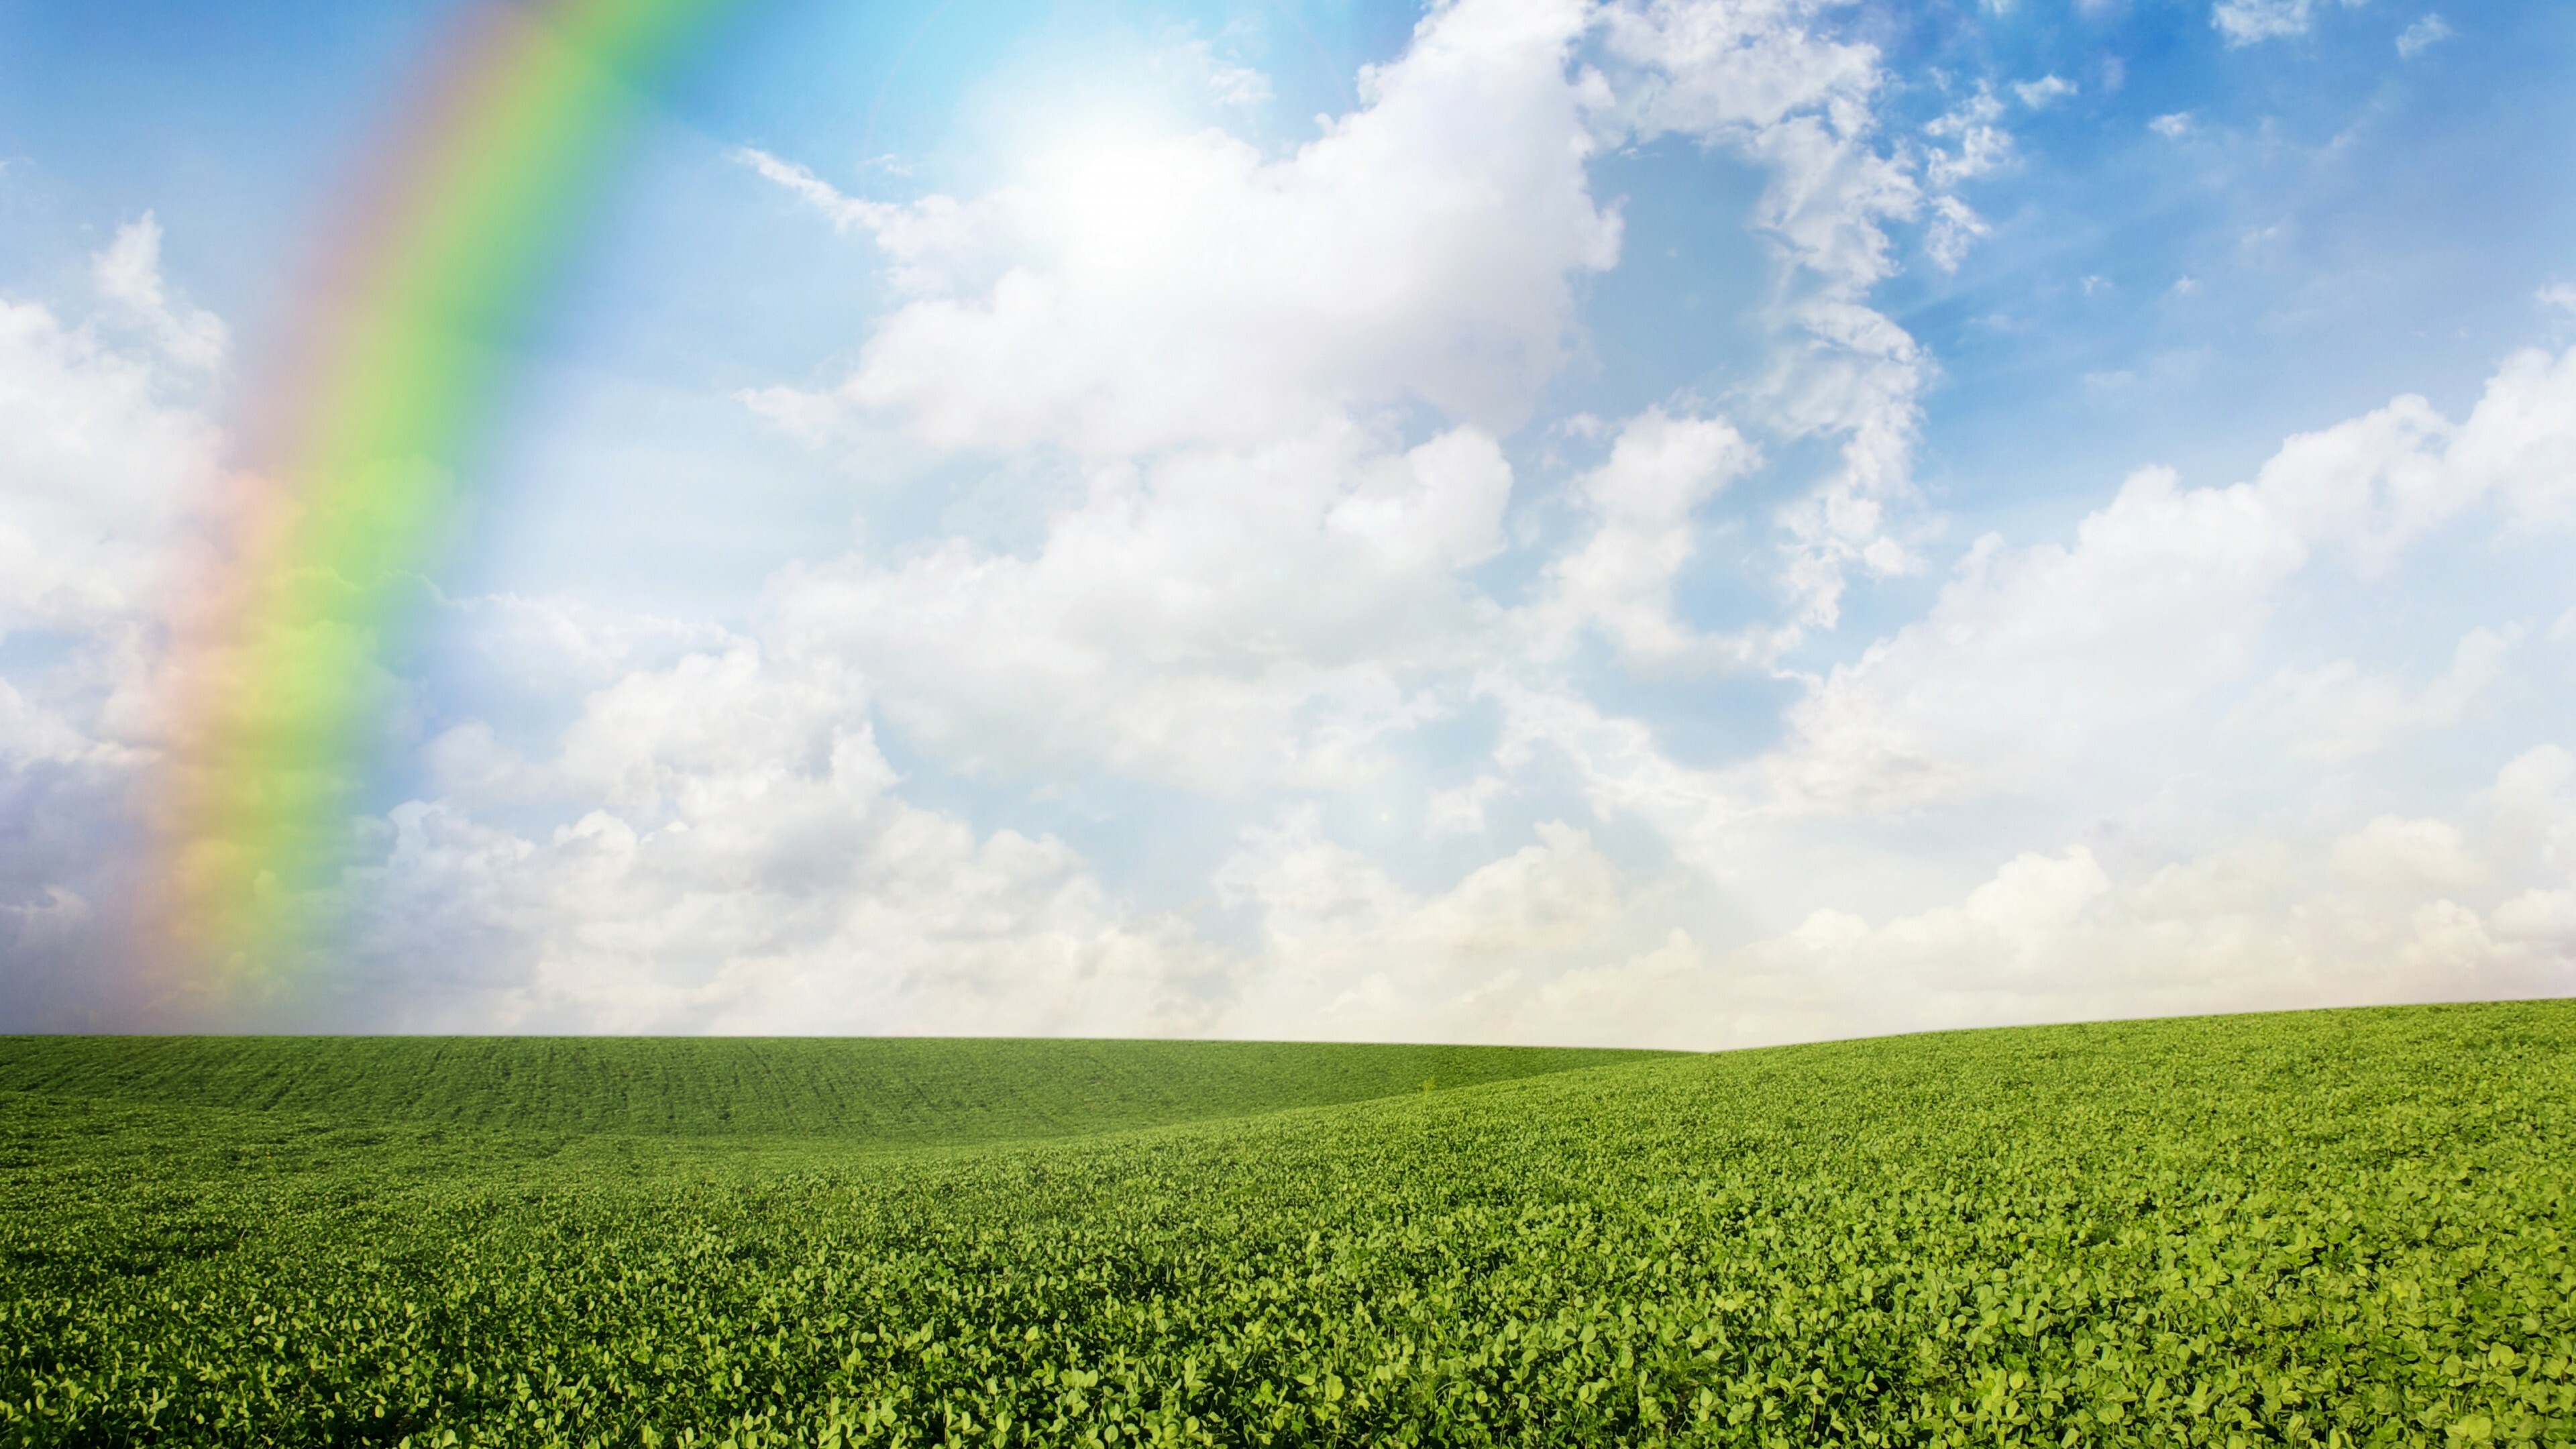 Rainbow Colors: Meadows, Field, Colorful meteorological phenomenon. 3840x2160 4K Background.